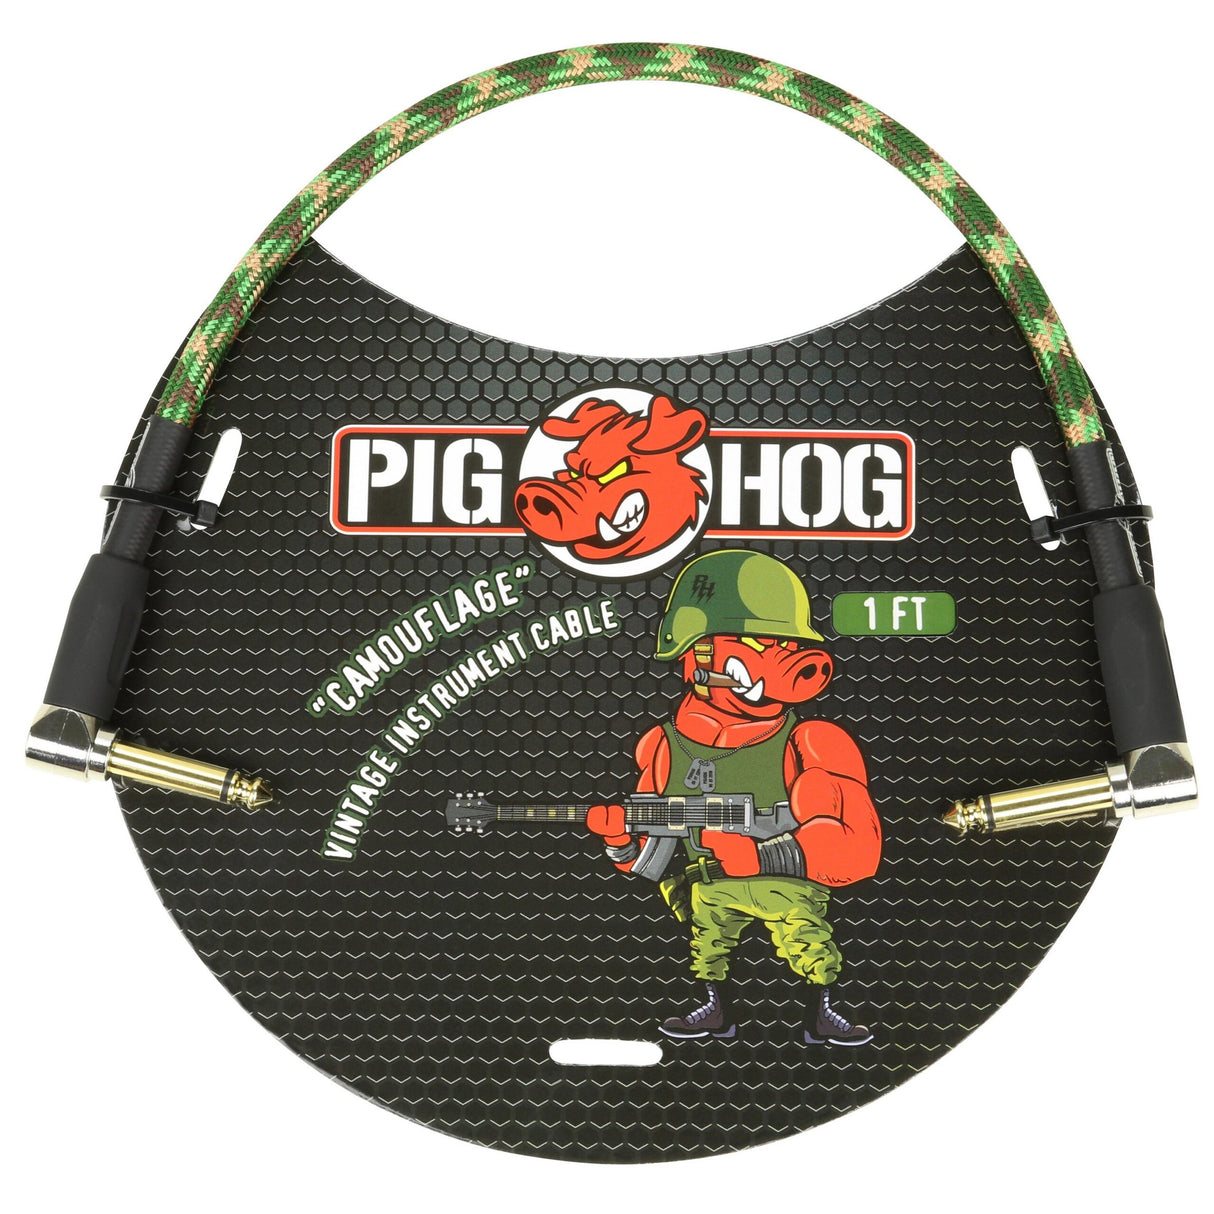 Pig Hog PCH1CFR "Camouflage" 1ft Right Angled Patch Cables